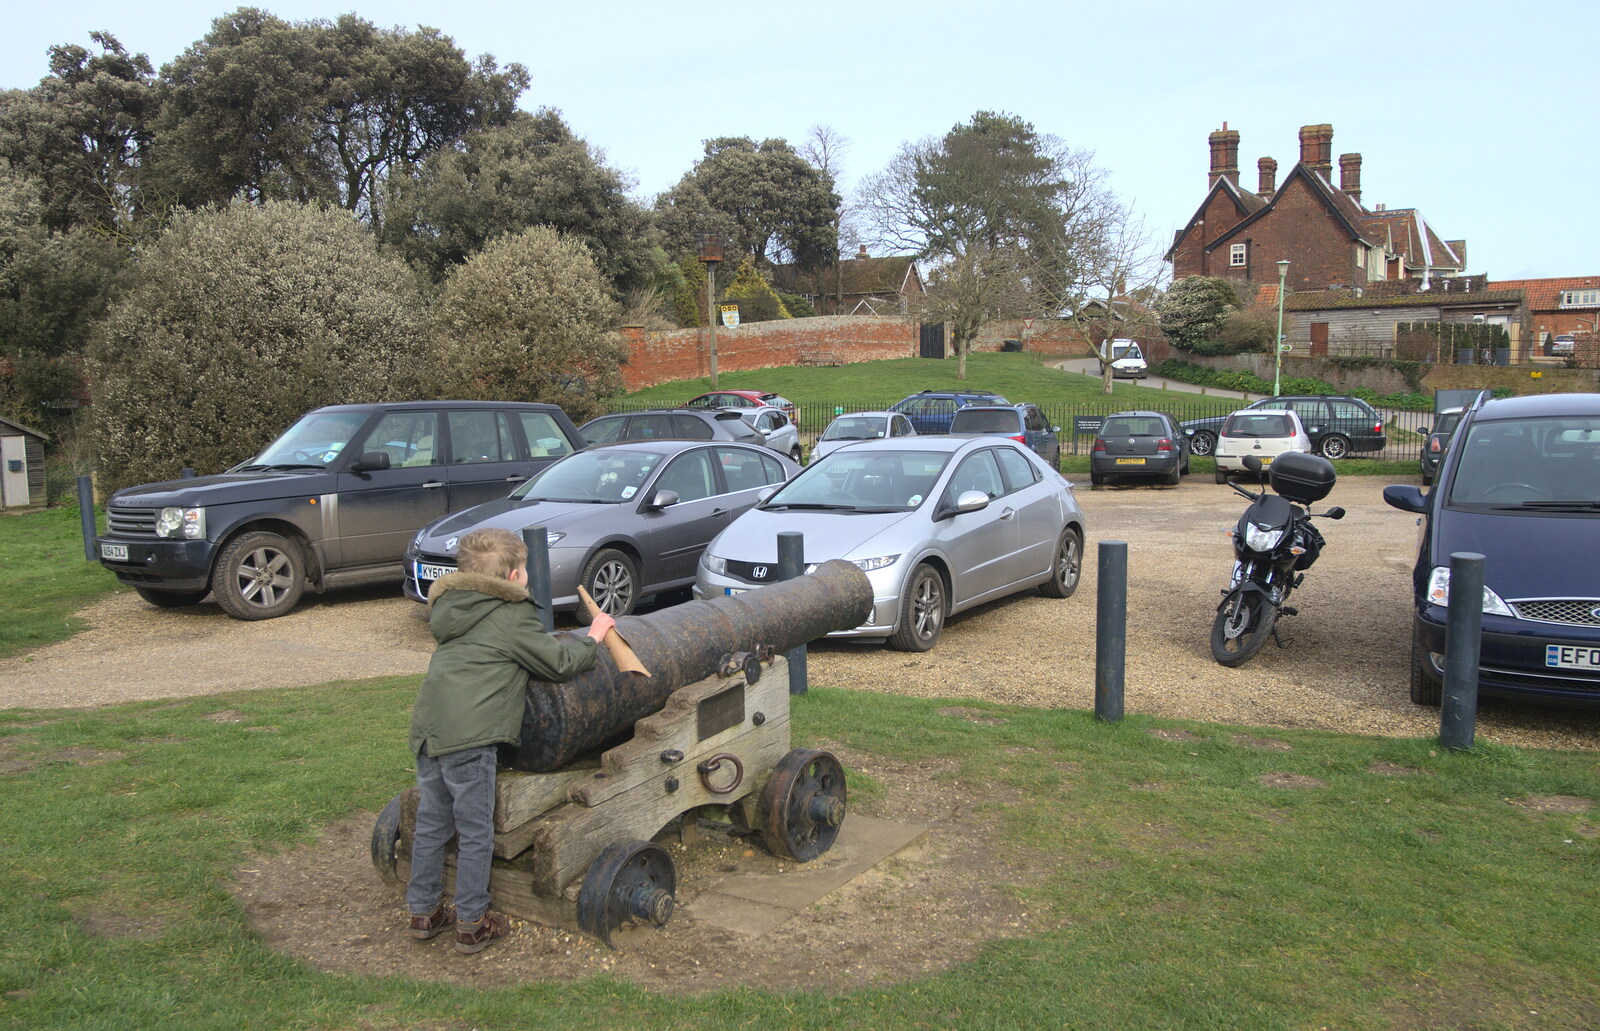 Fred pretends to fire a cannon at the town from A Trip to Orford Castle, Orford, Suffolk - 2nd March 2014